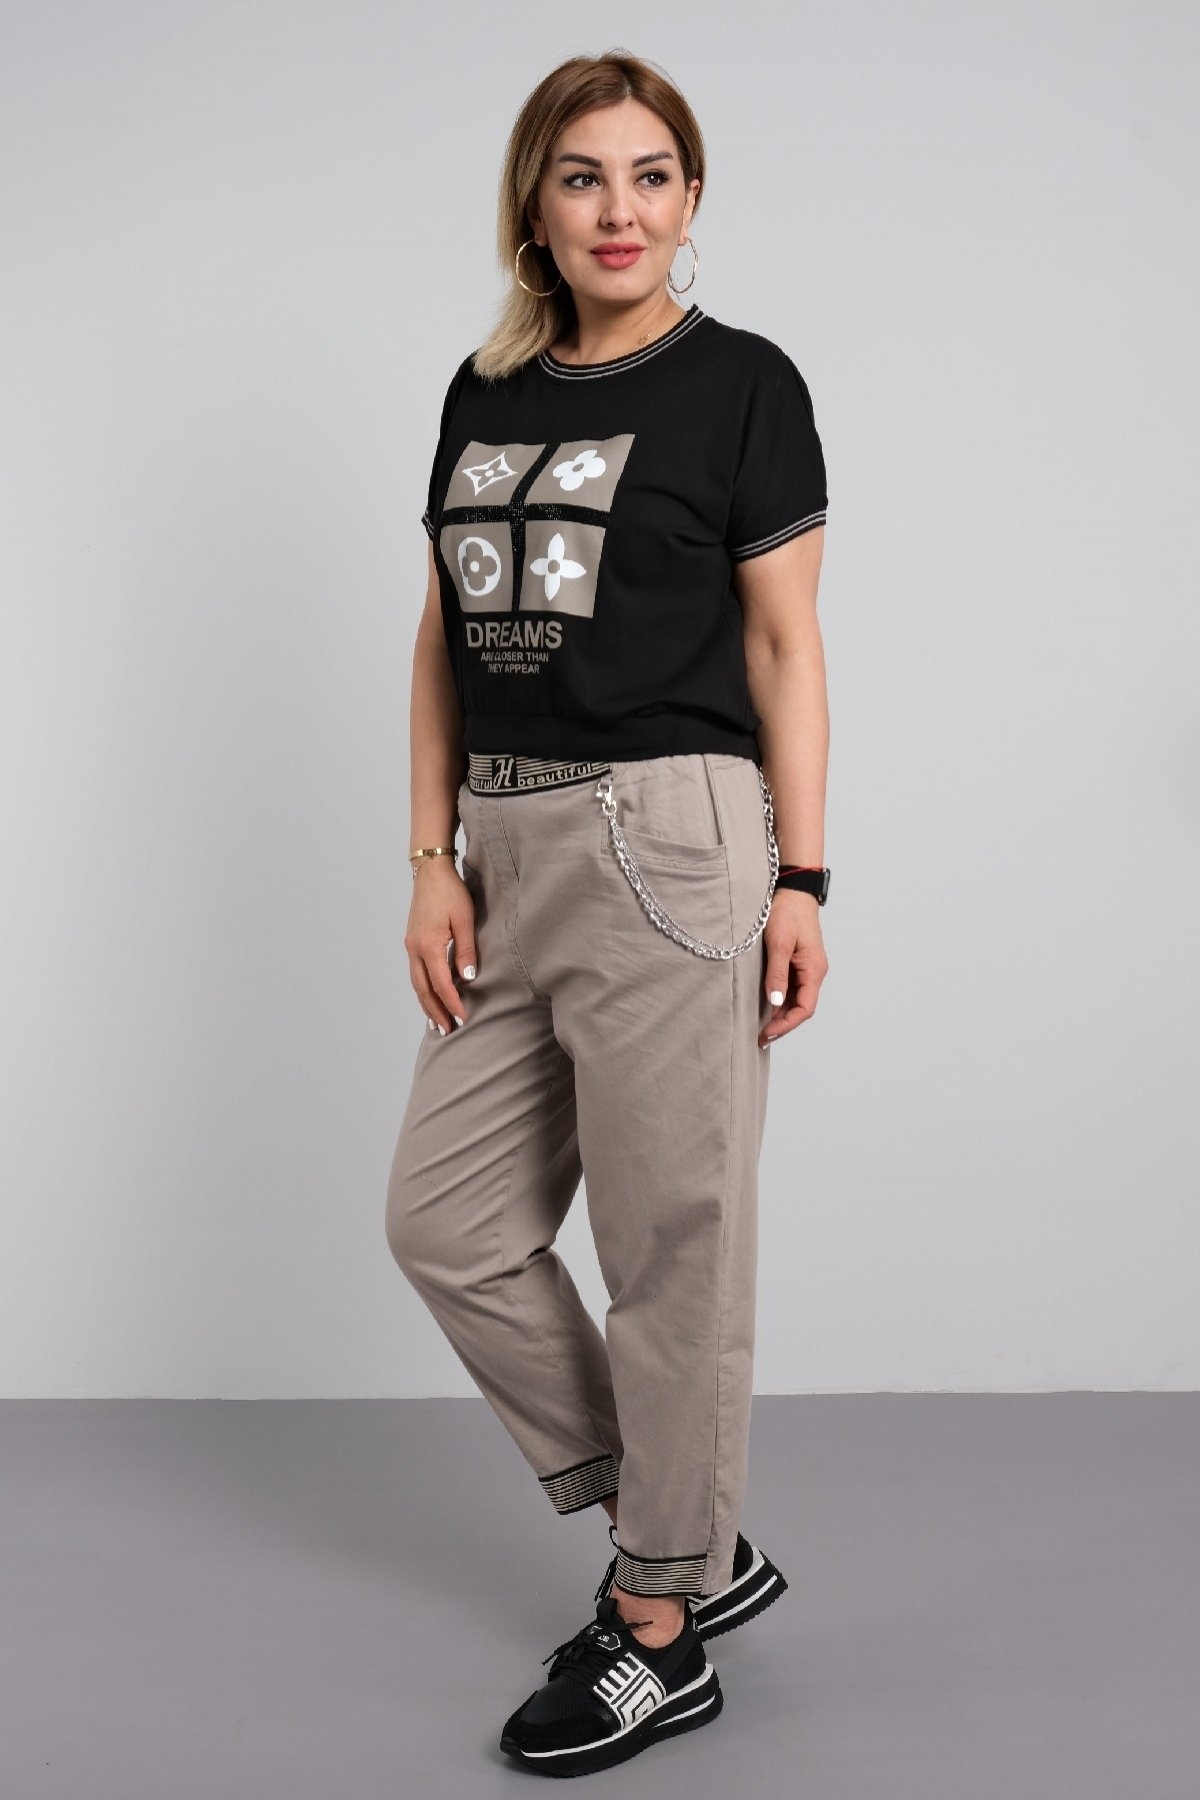 Women's oversize double suit with cuffed visual detail t-shirt and chain accessory casual with pocketed trousers